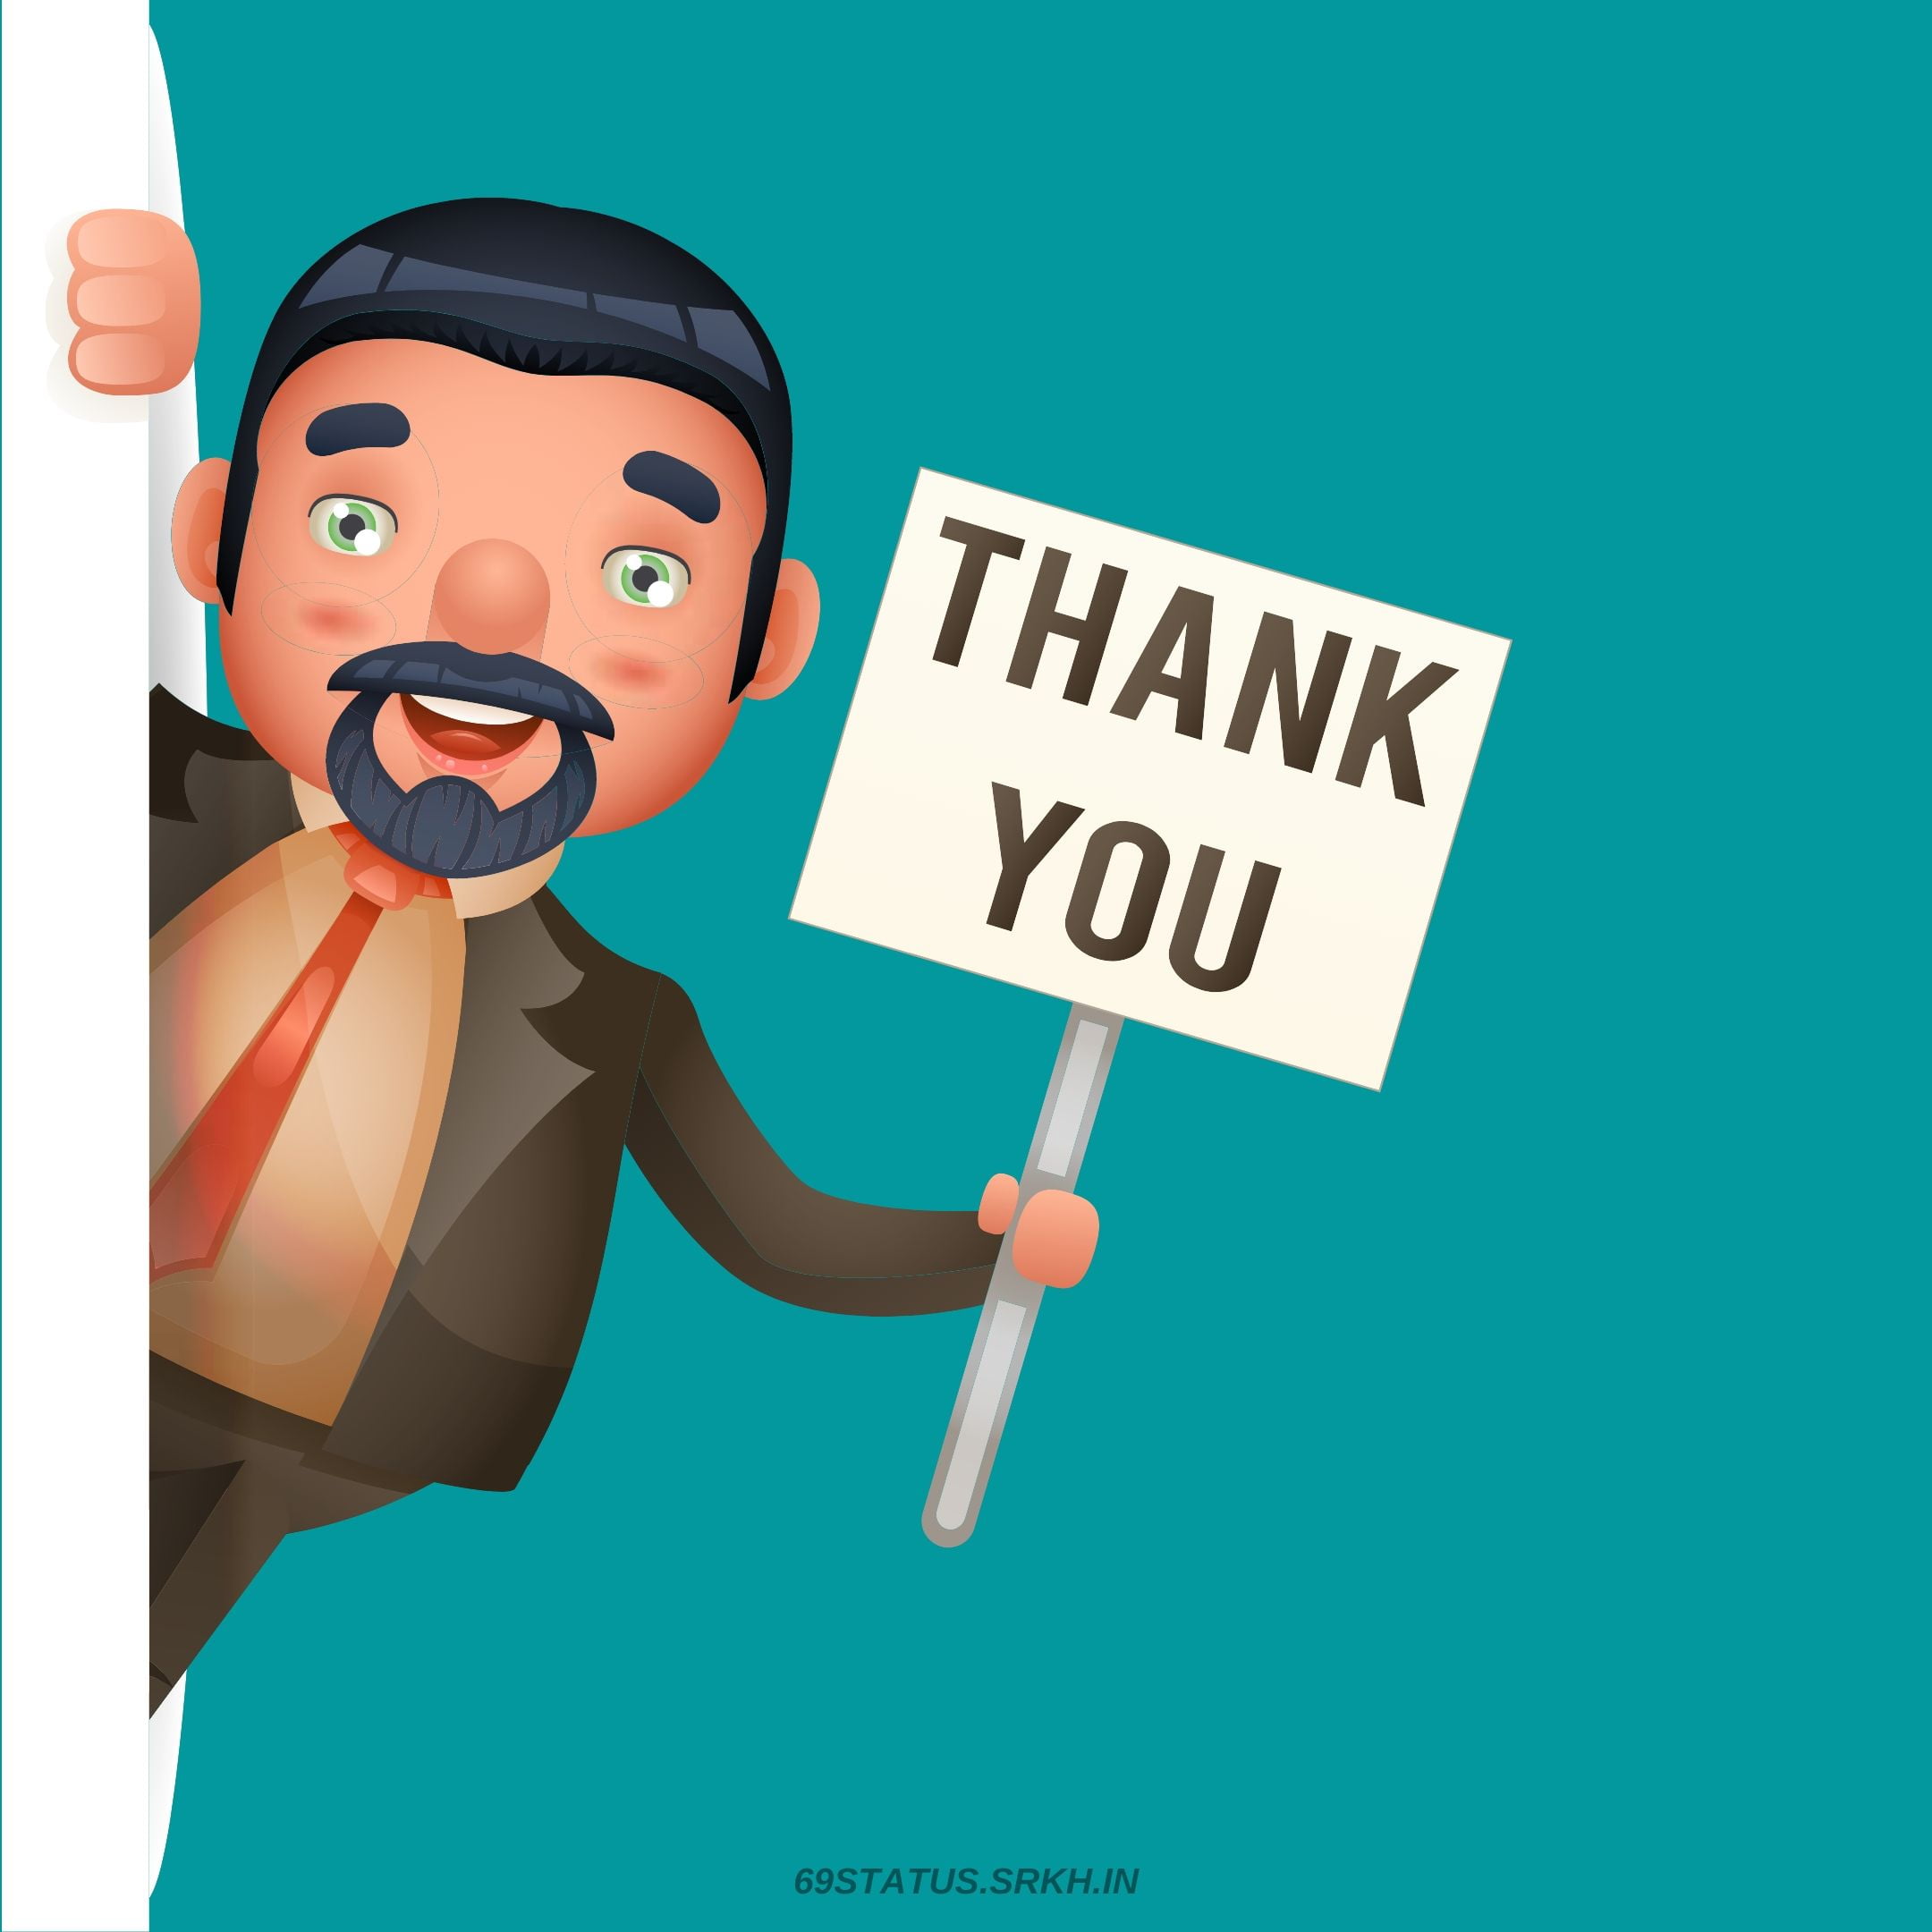 🔥 Thank You Cartoon Images Download free - Images SRkh